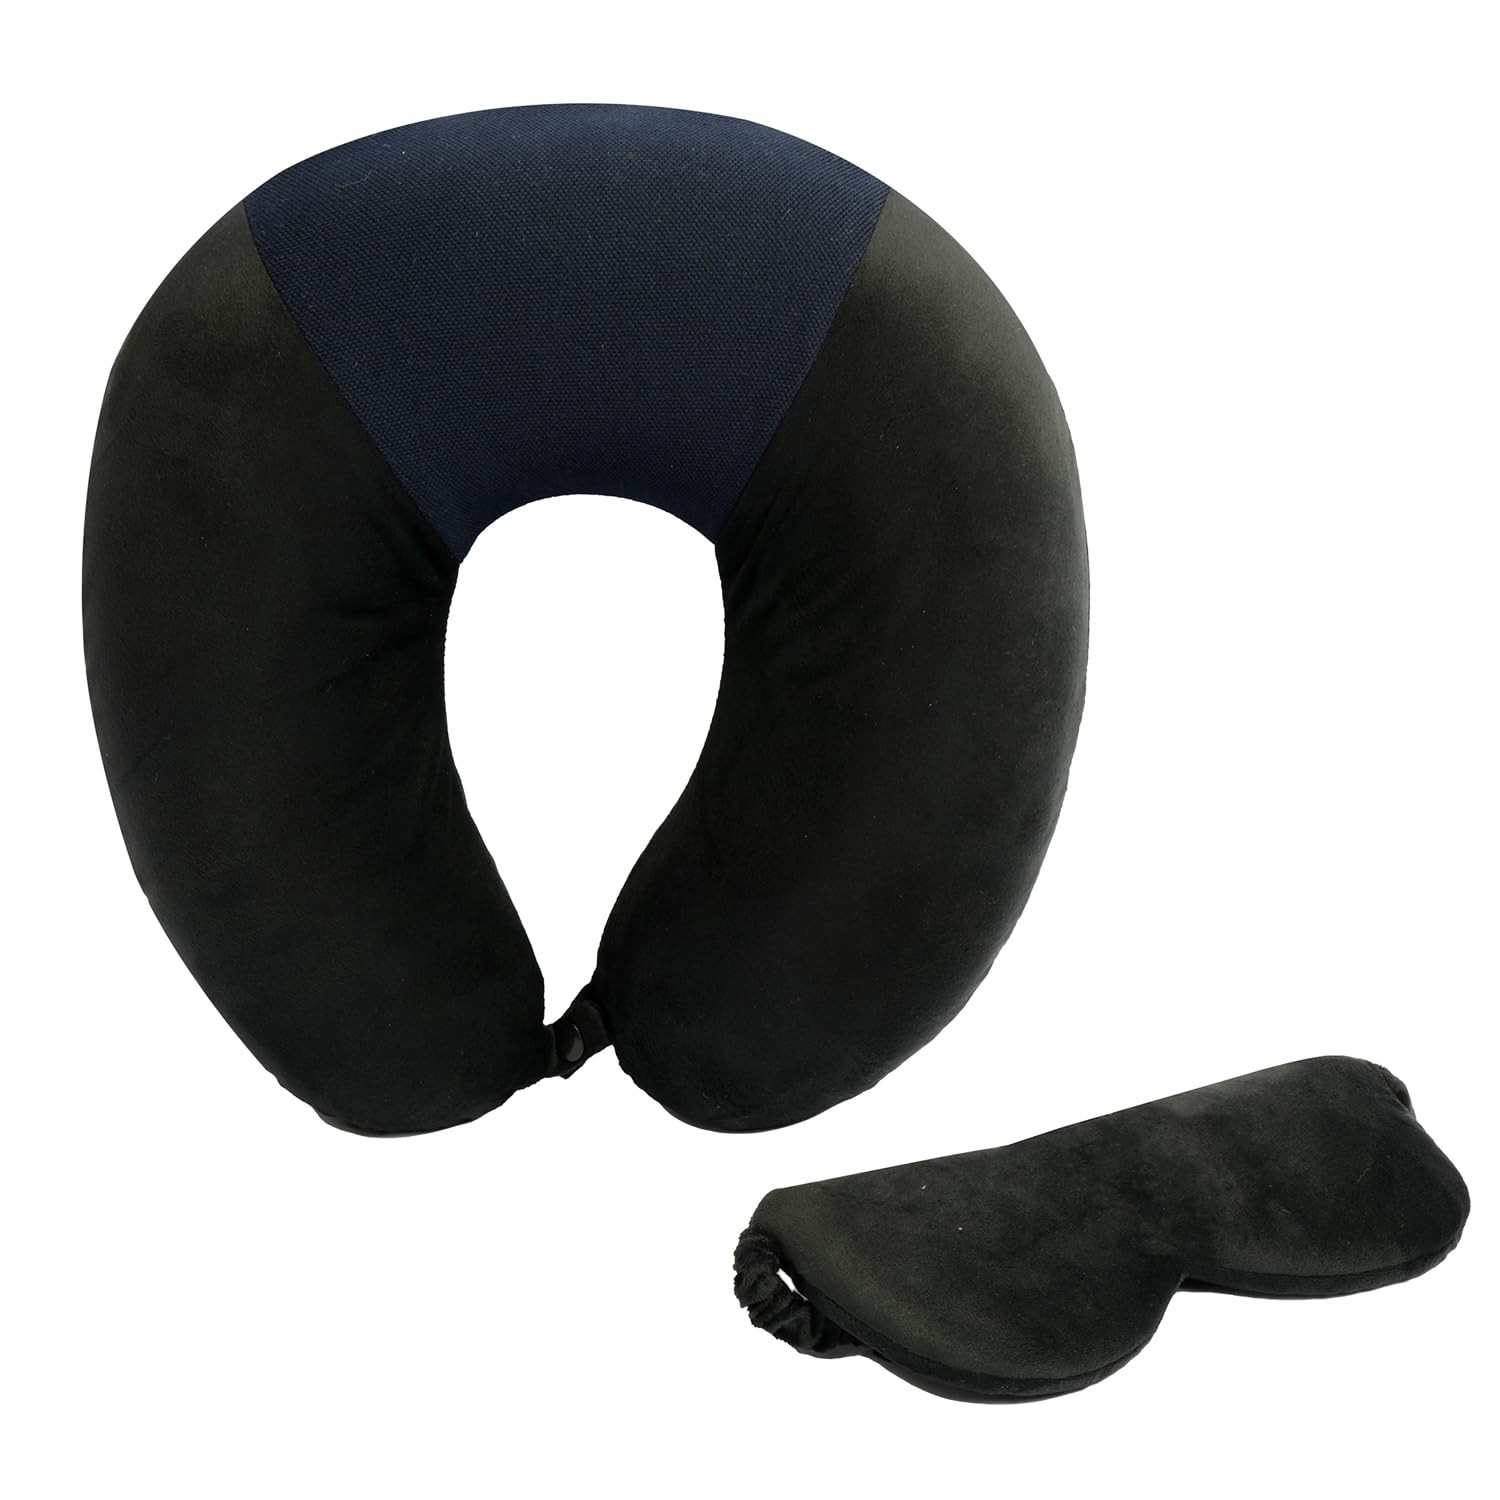 Kuber Industries Travel Neck Pillow With Sleeping Eye Mask|Neck Support Rest Pillow|Velvet Cover With Microfiber Fillling (Black)